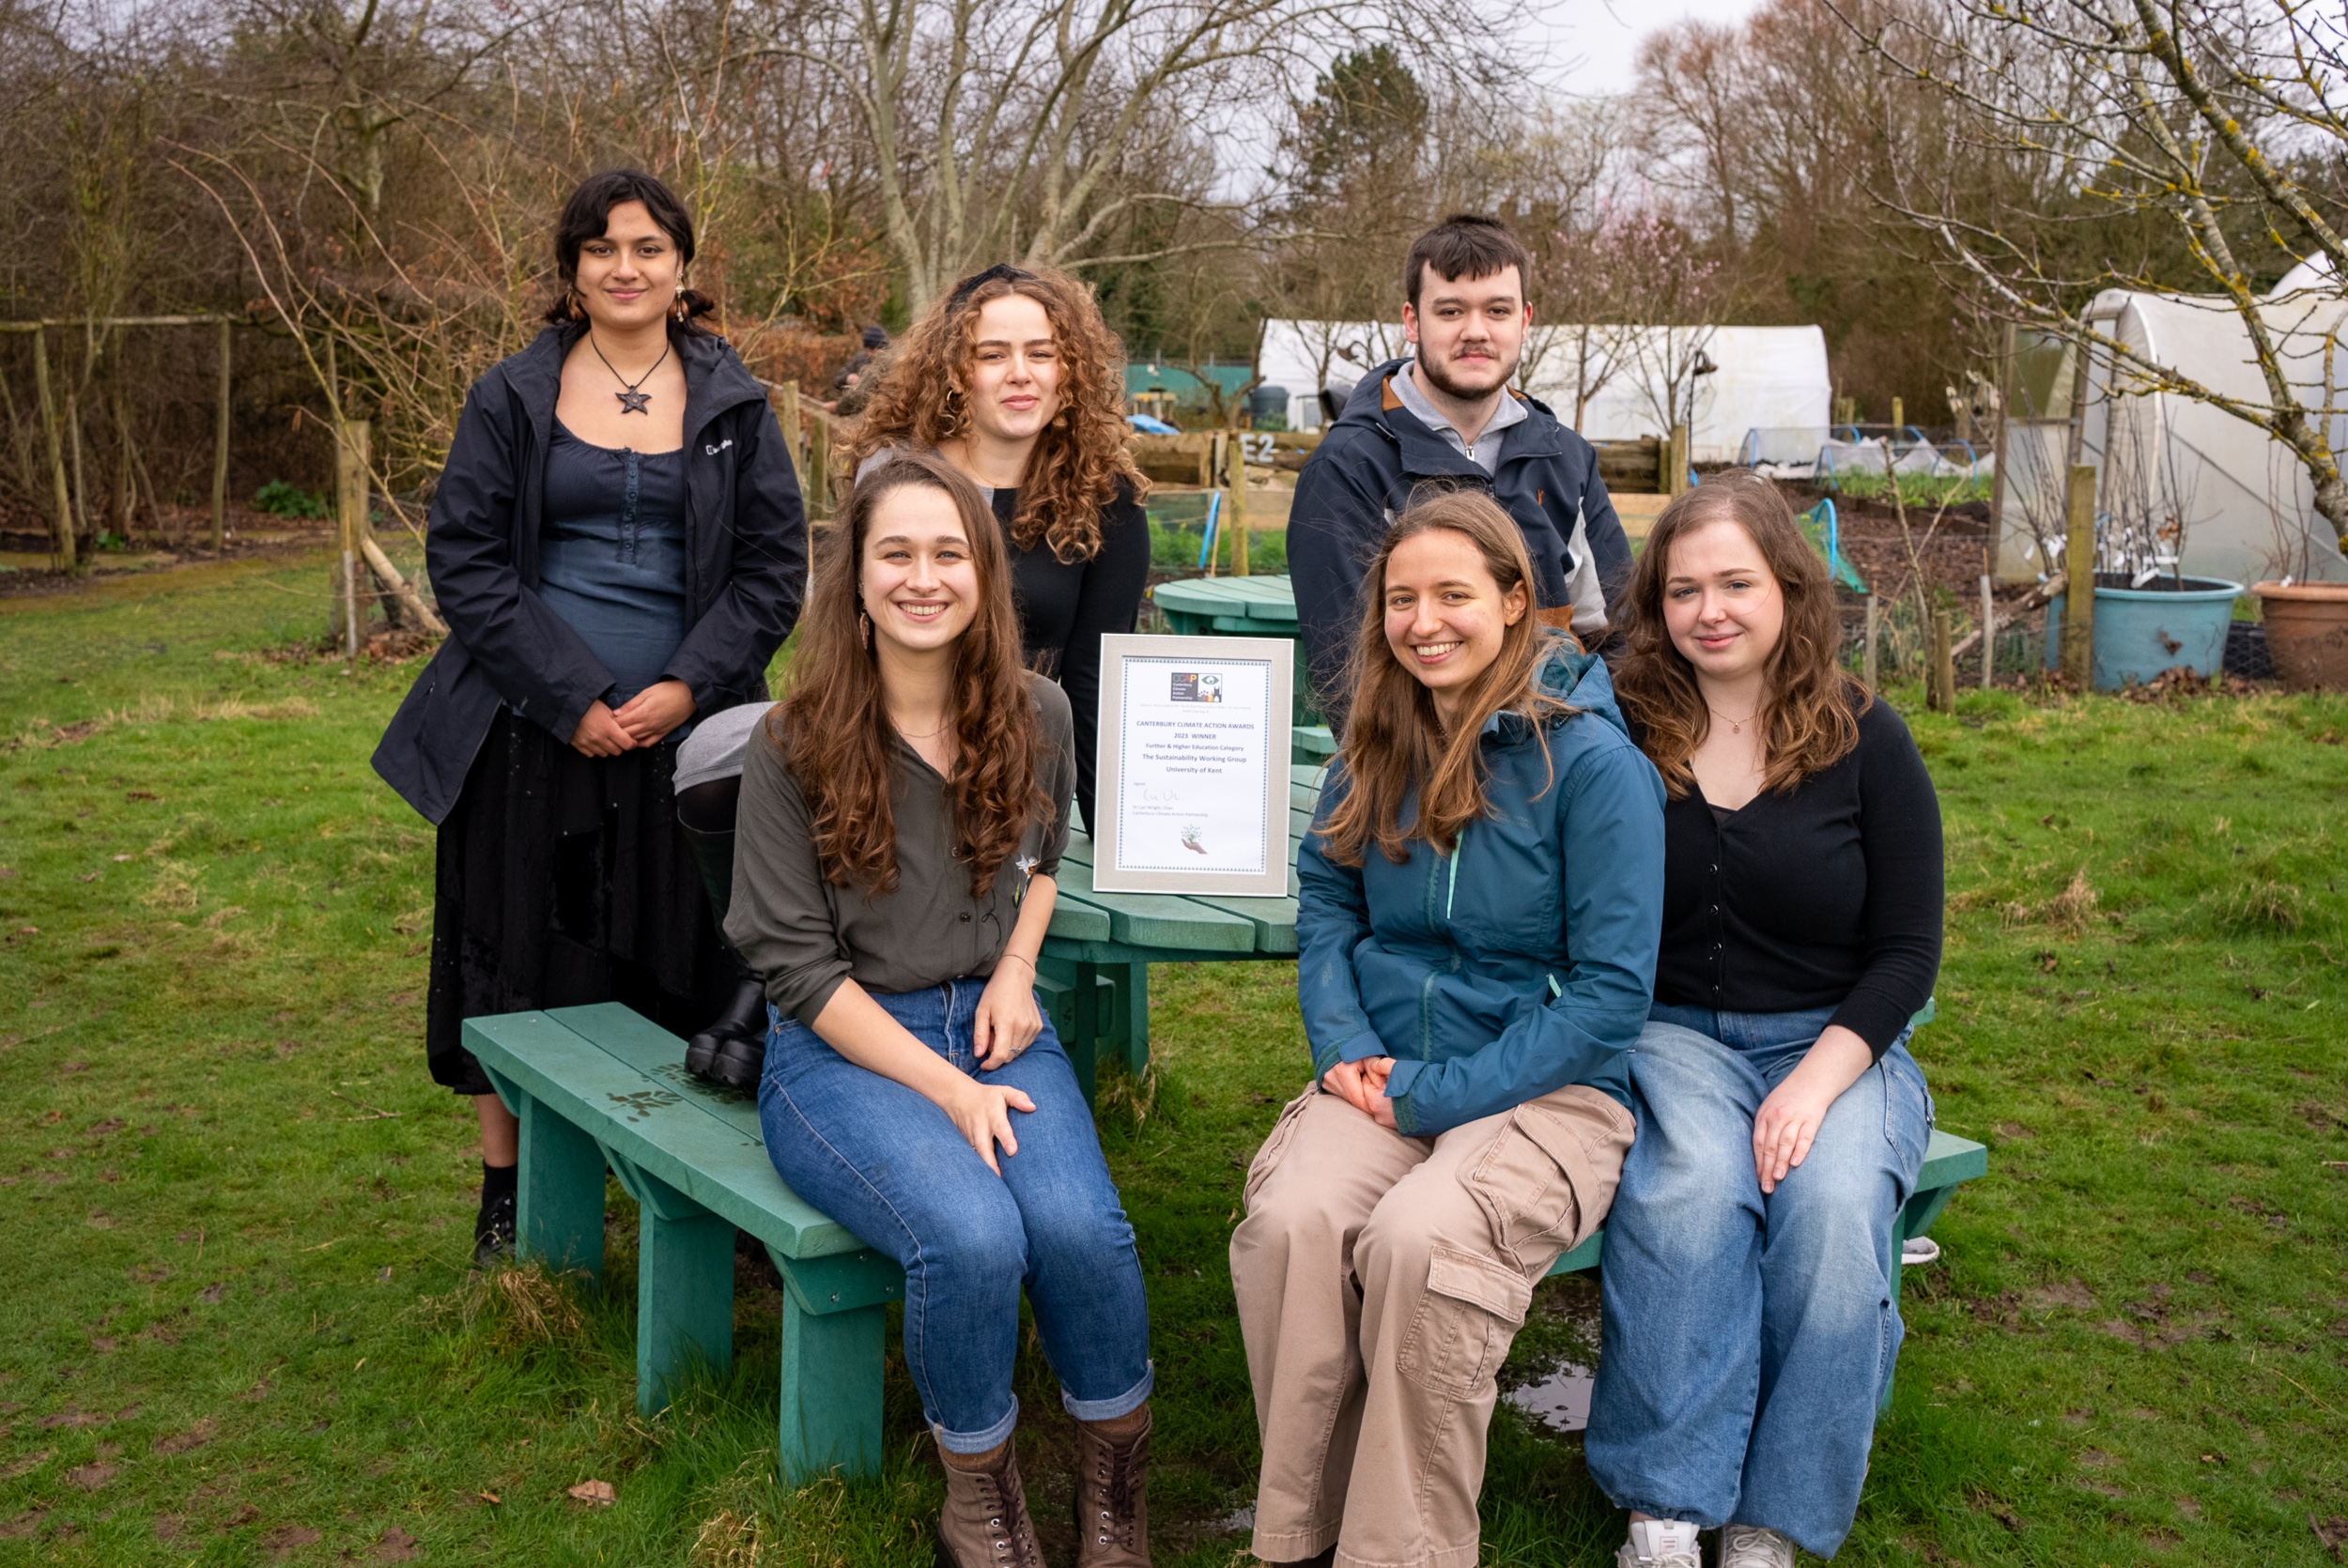 Sustainability Working Group sat on bench smiling with their Climate Action Award